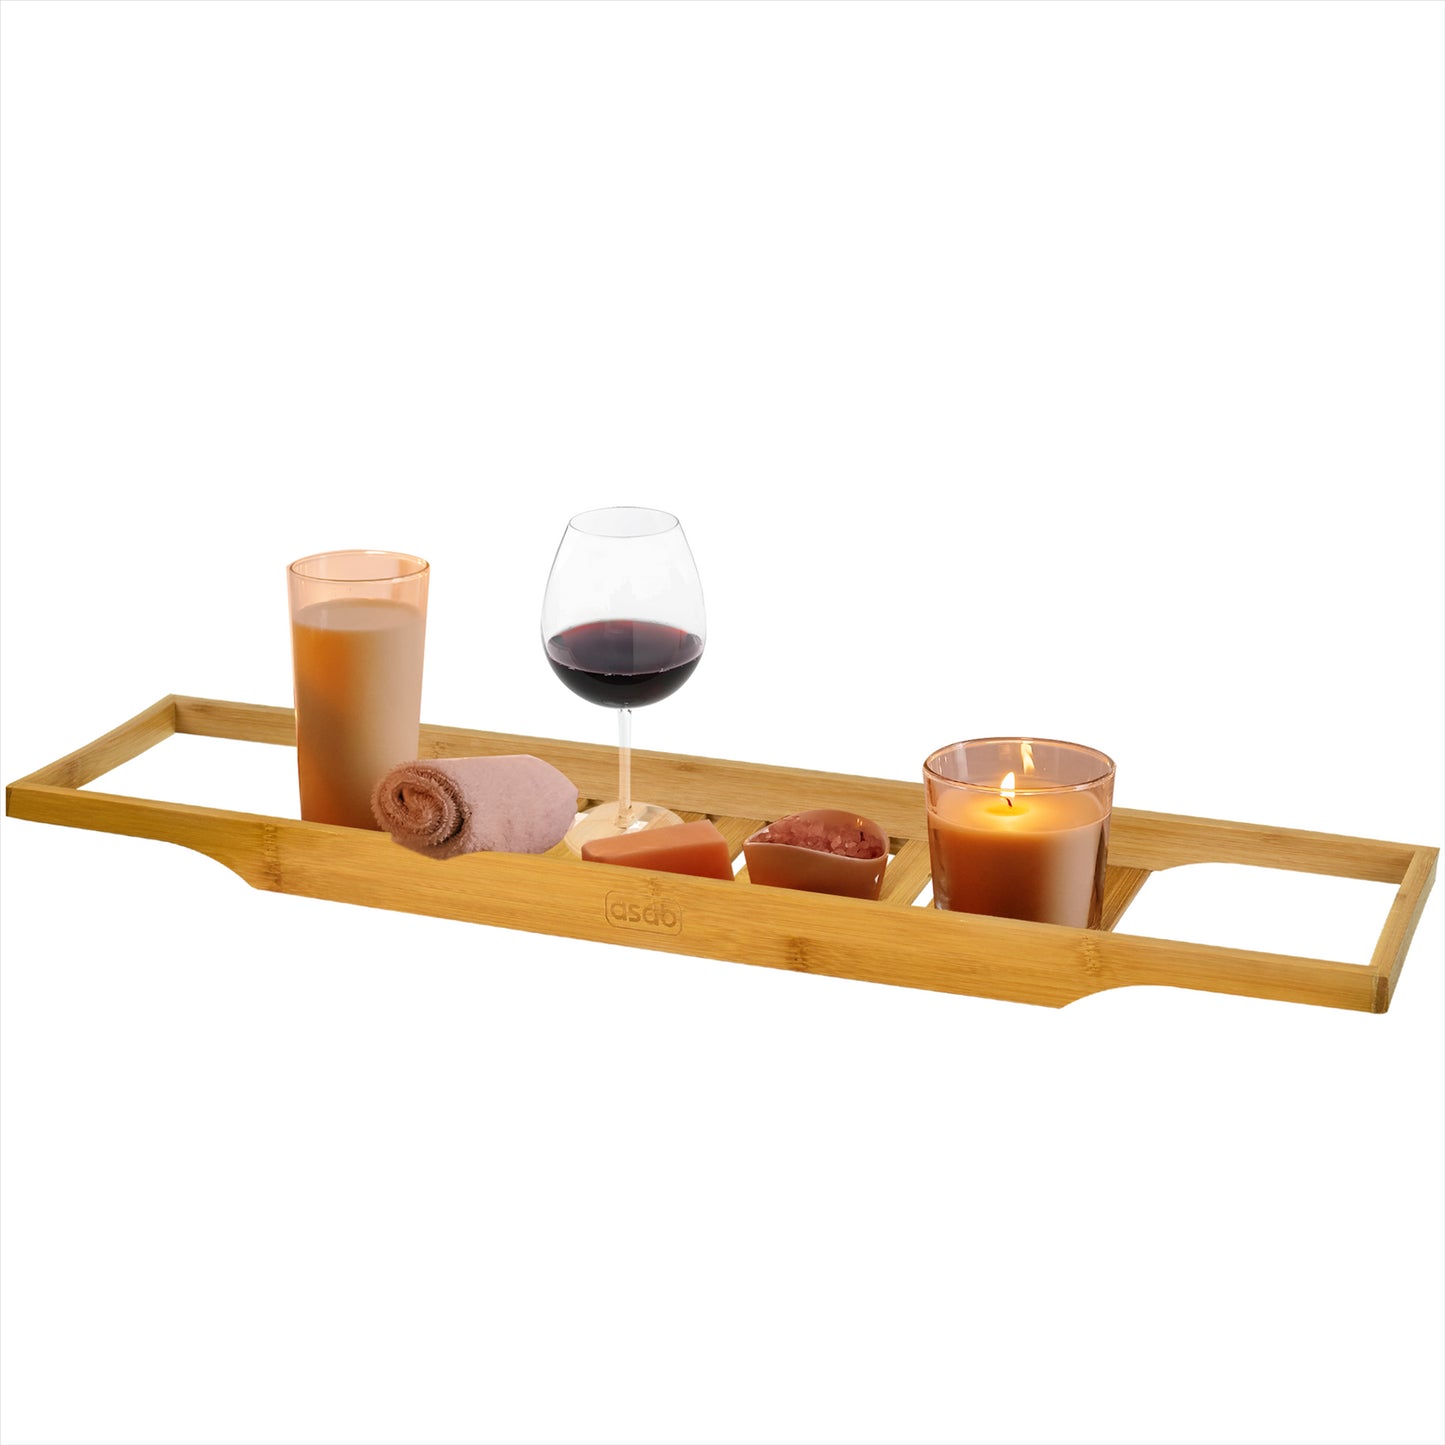 Keep Your Bathroom Neat and Tidy with a Bamboo Organizer Tray